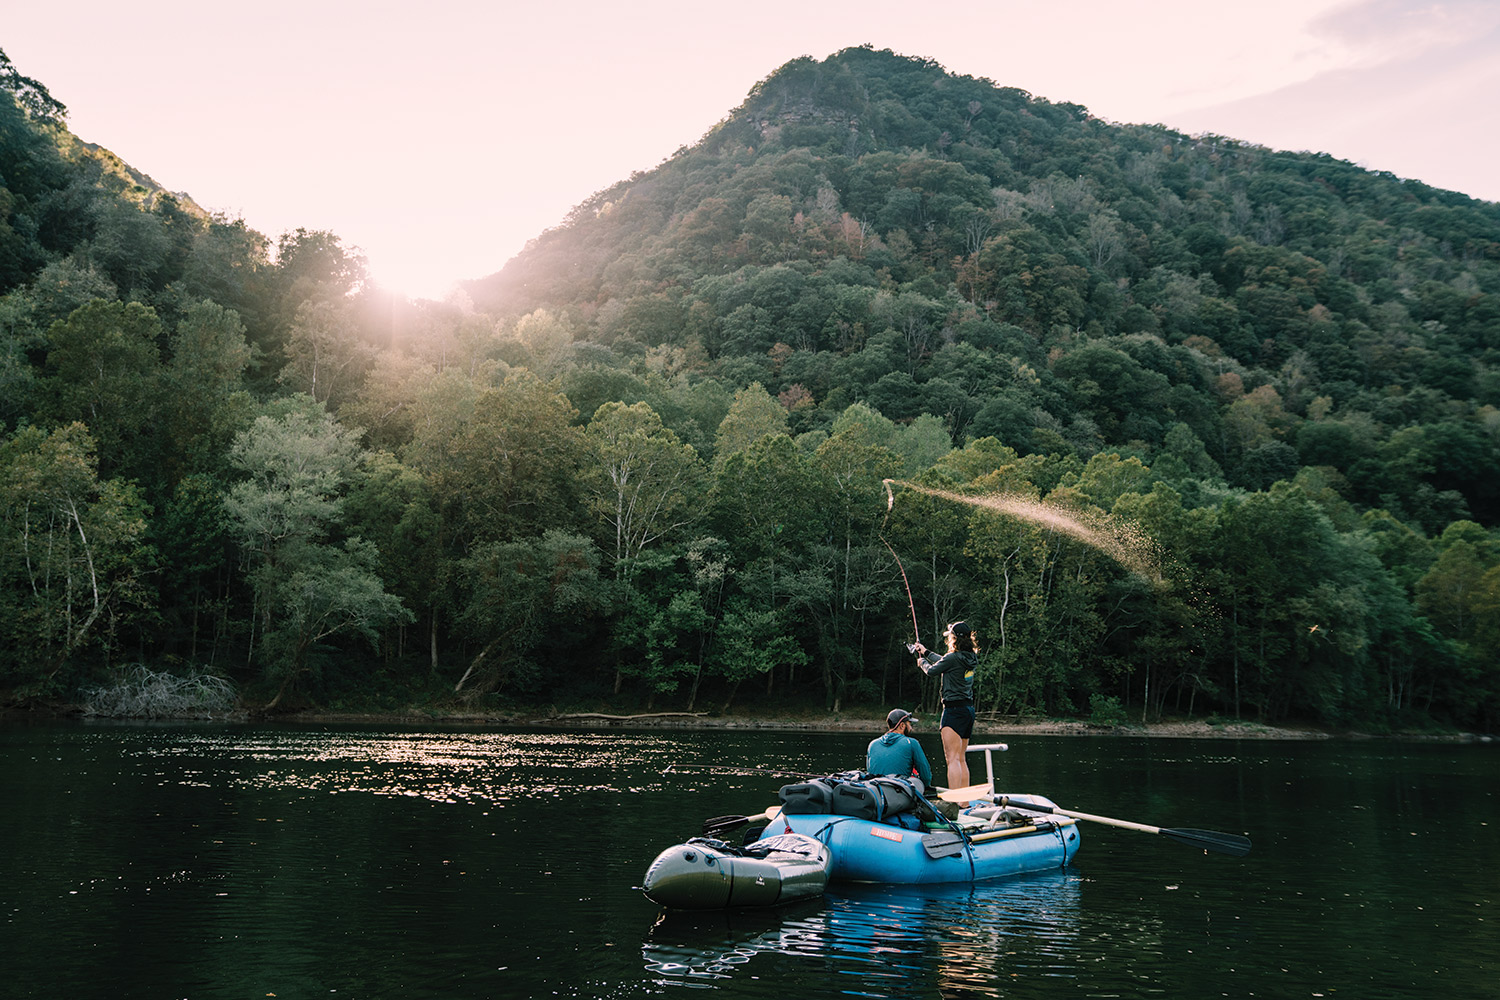 Angler stands on large raft to cast as sun sets behind tree-covered hills.